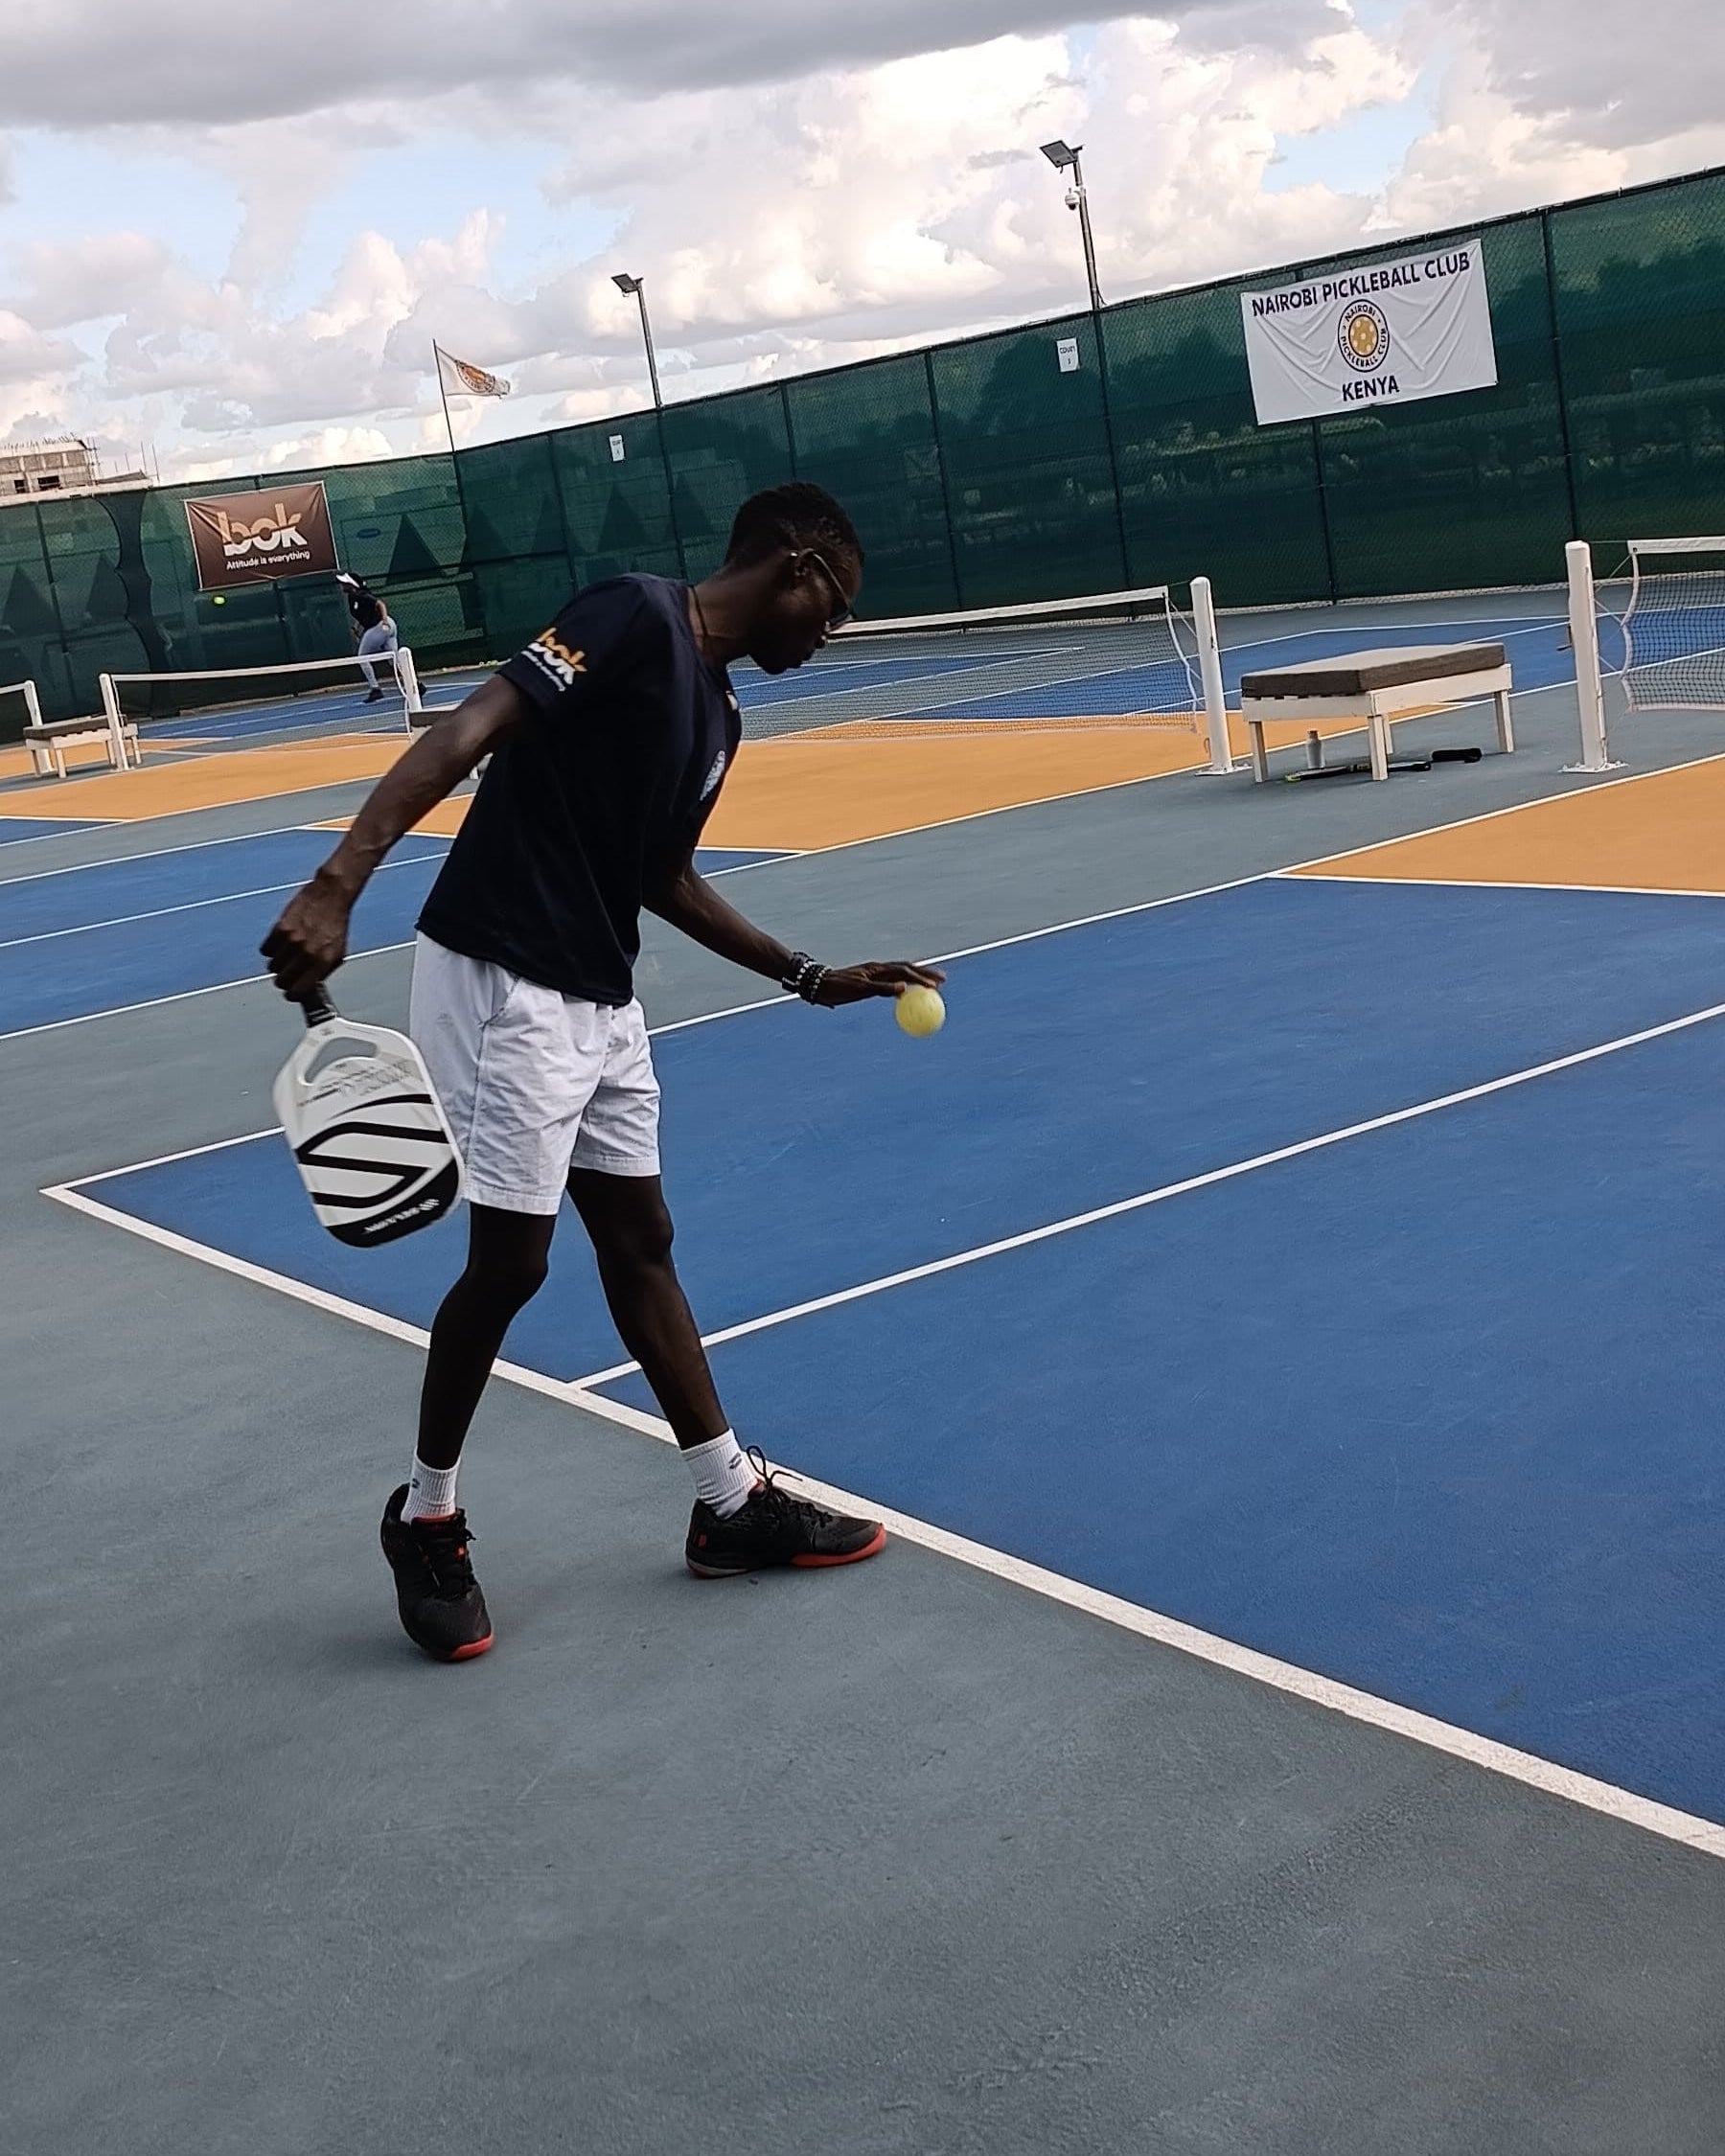 Brian Owmando is spreading the game of pickleball in Africa.